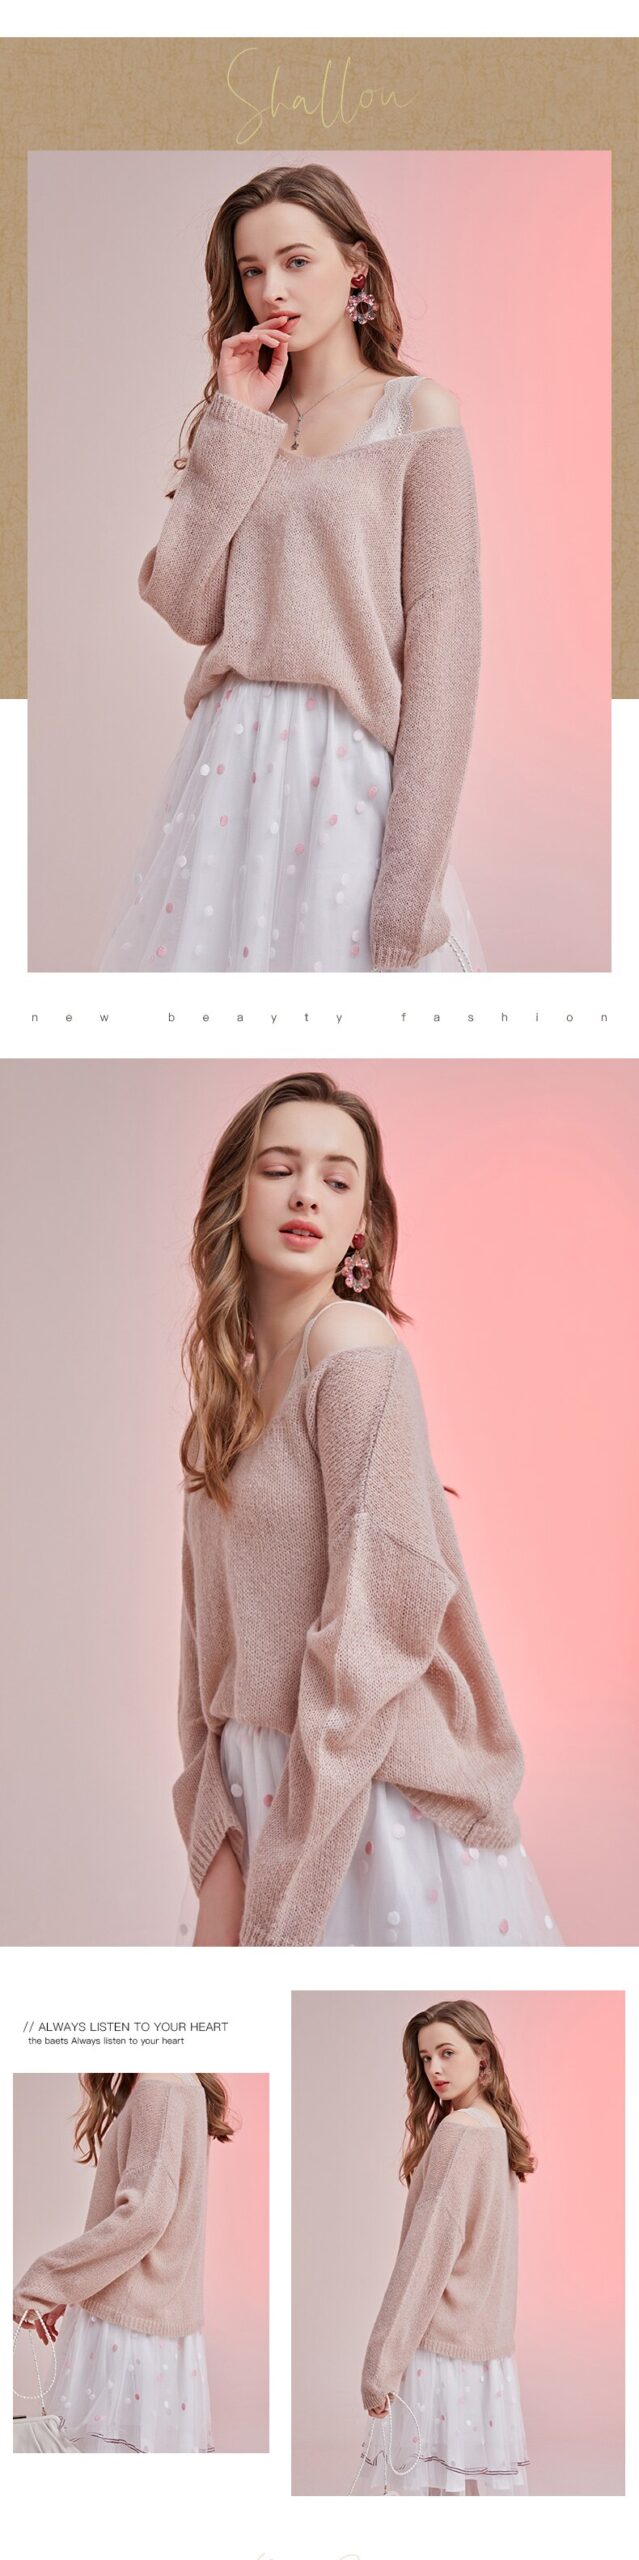 ARTKA 2021 Spring New Women Sweater Elegant V-Neck Pink Wool Knitwear Loose Soft Mohair Long Sleeve Knitted Sweaters YB25015C